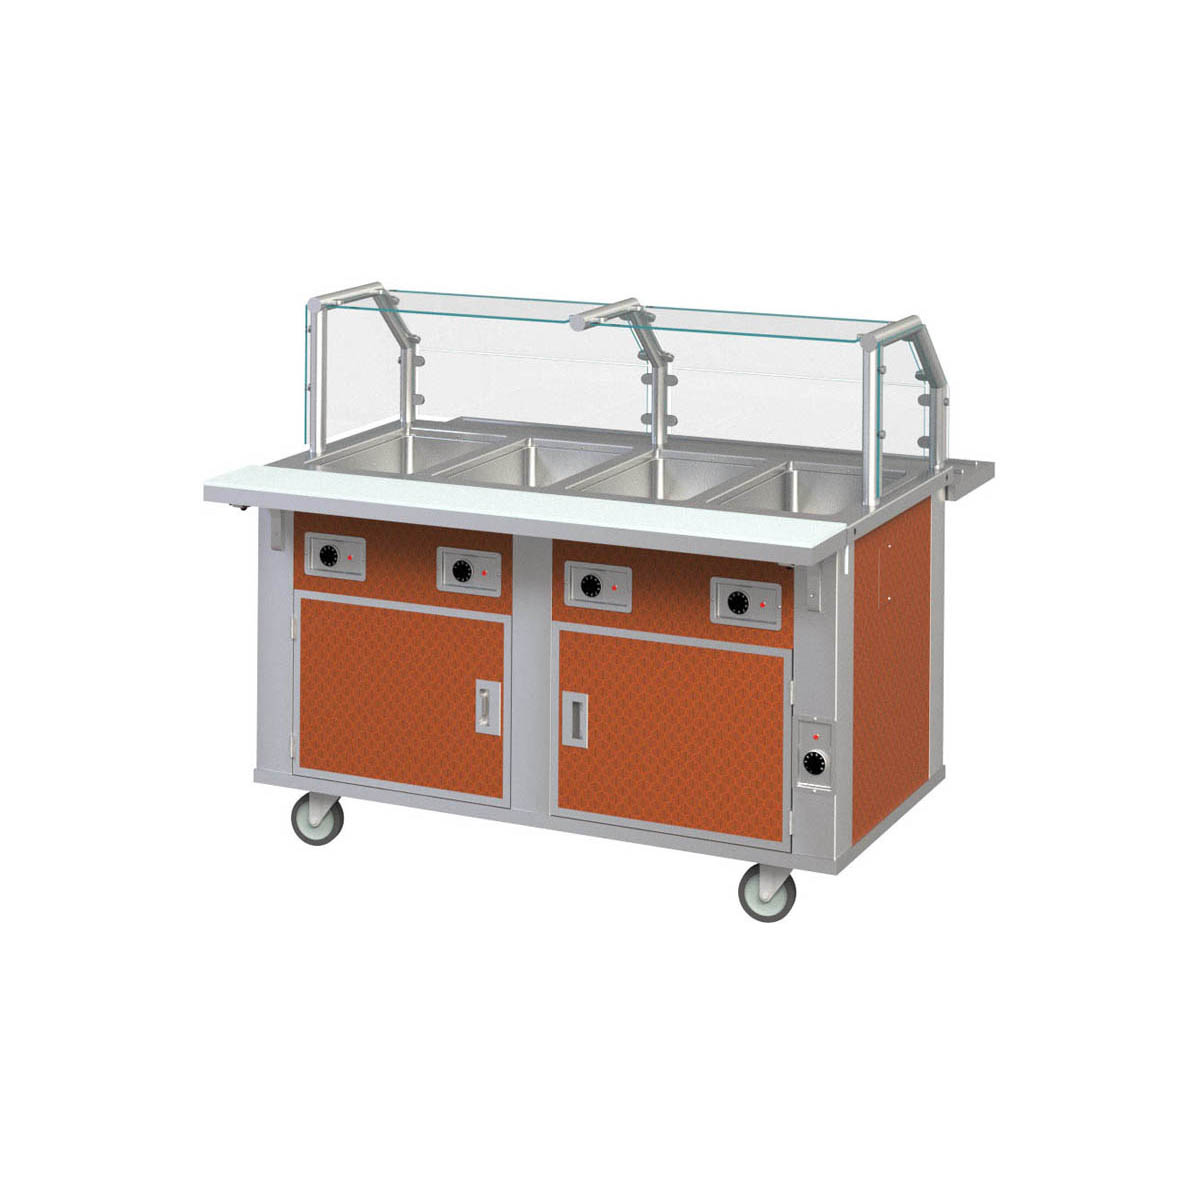 Piper Products 4-HF Electric Hot Food Serving Counter